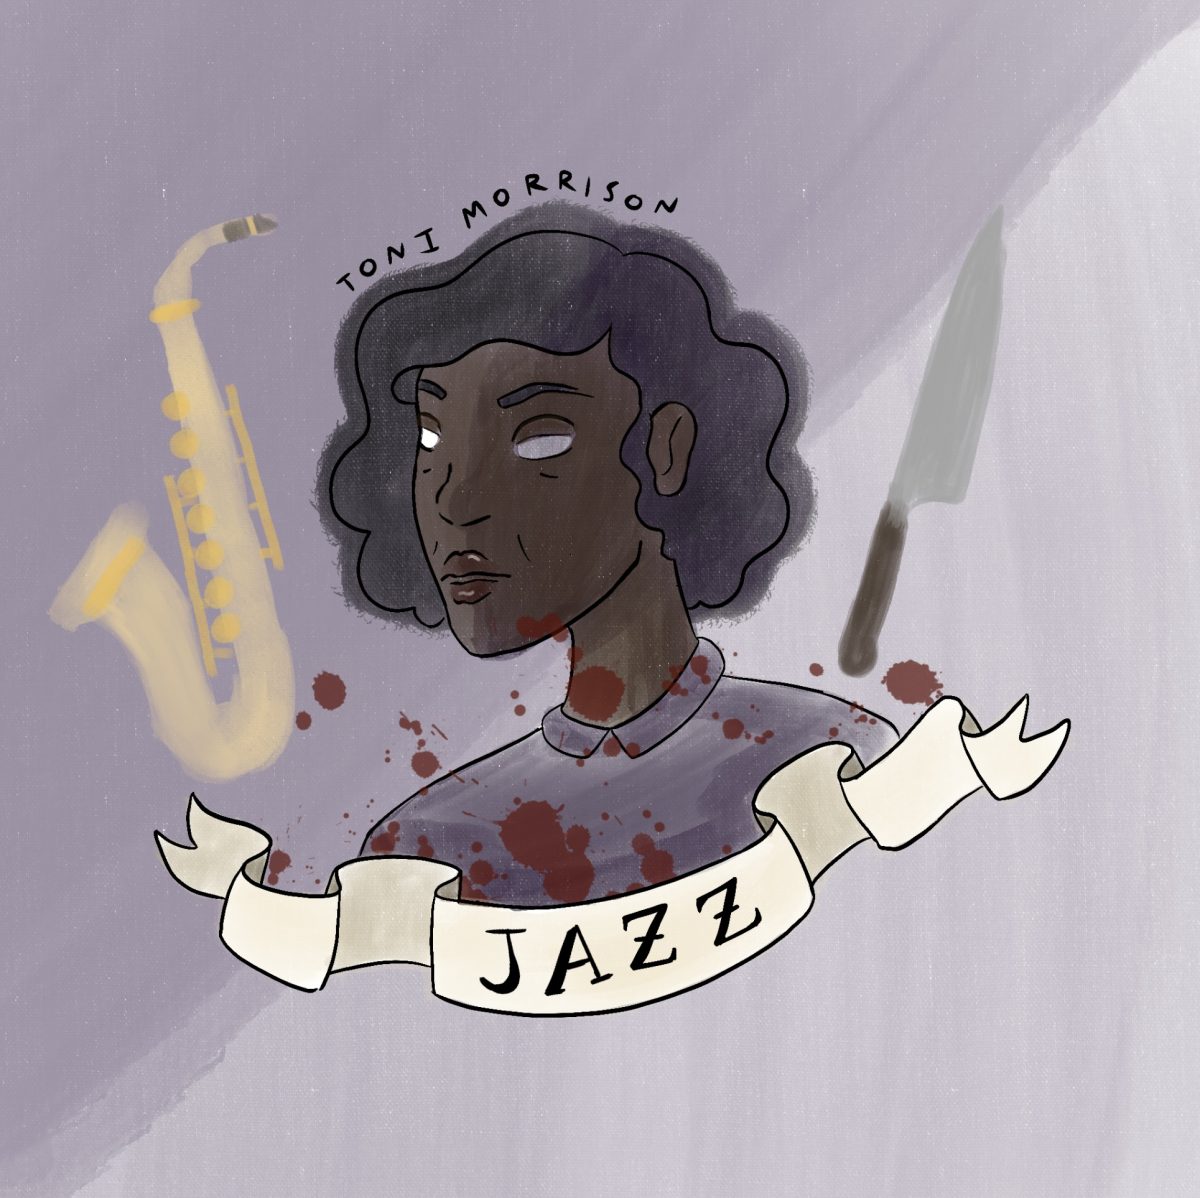 Jazz+by+Toni+Morrison+parallels+the+music+of+its+namesake.+